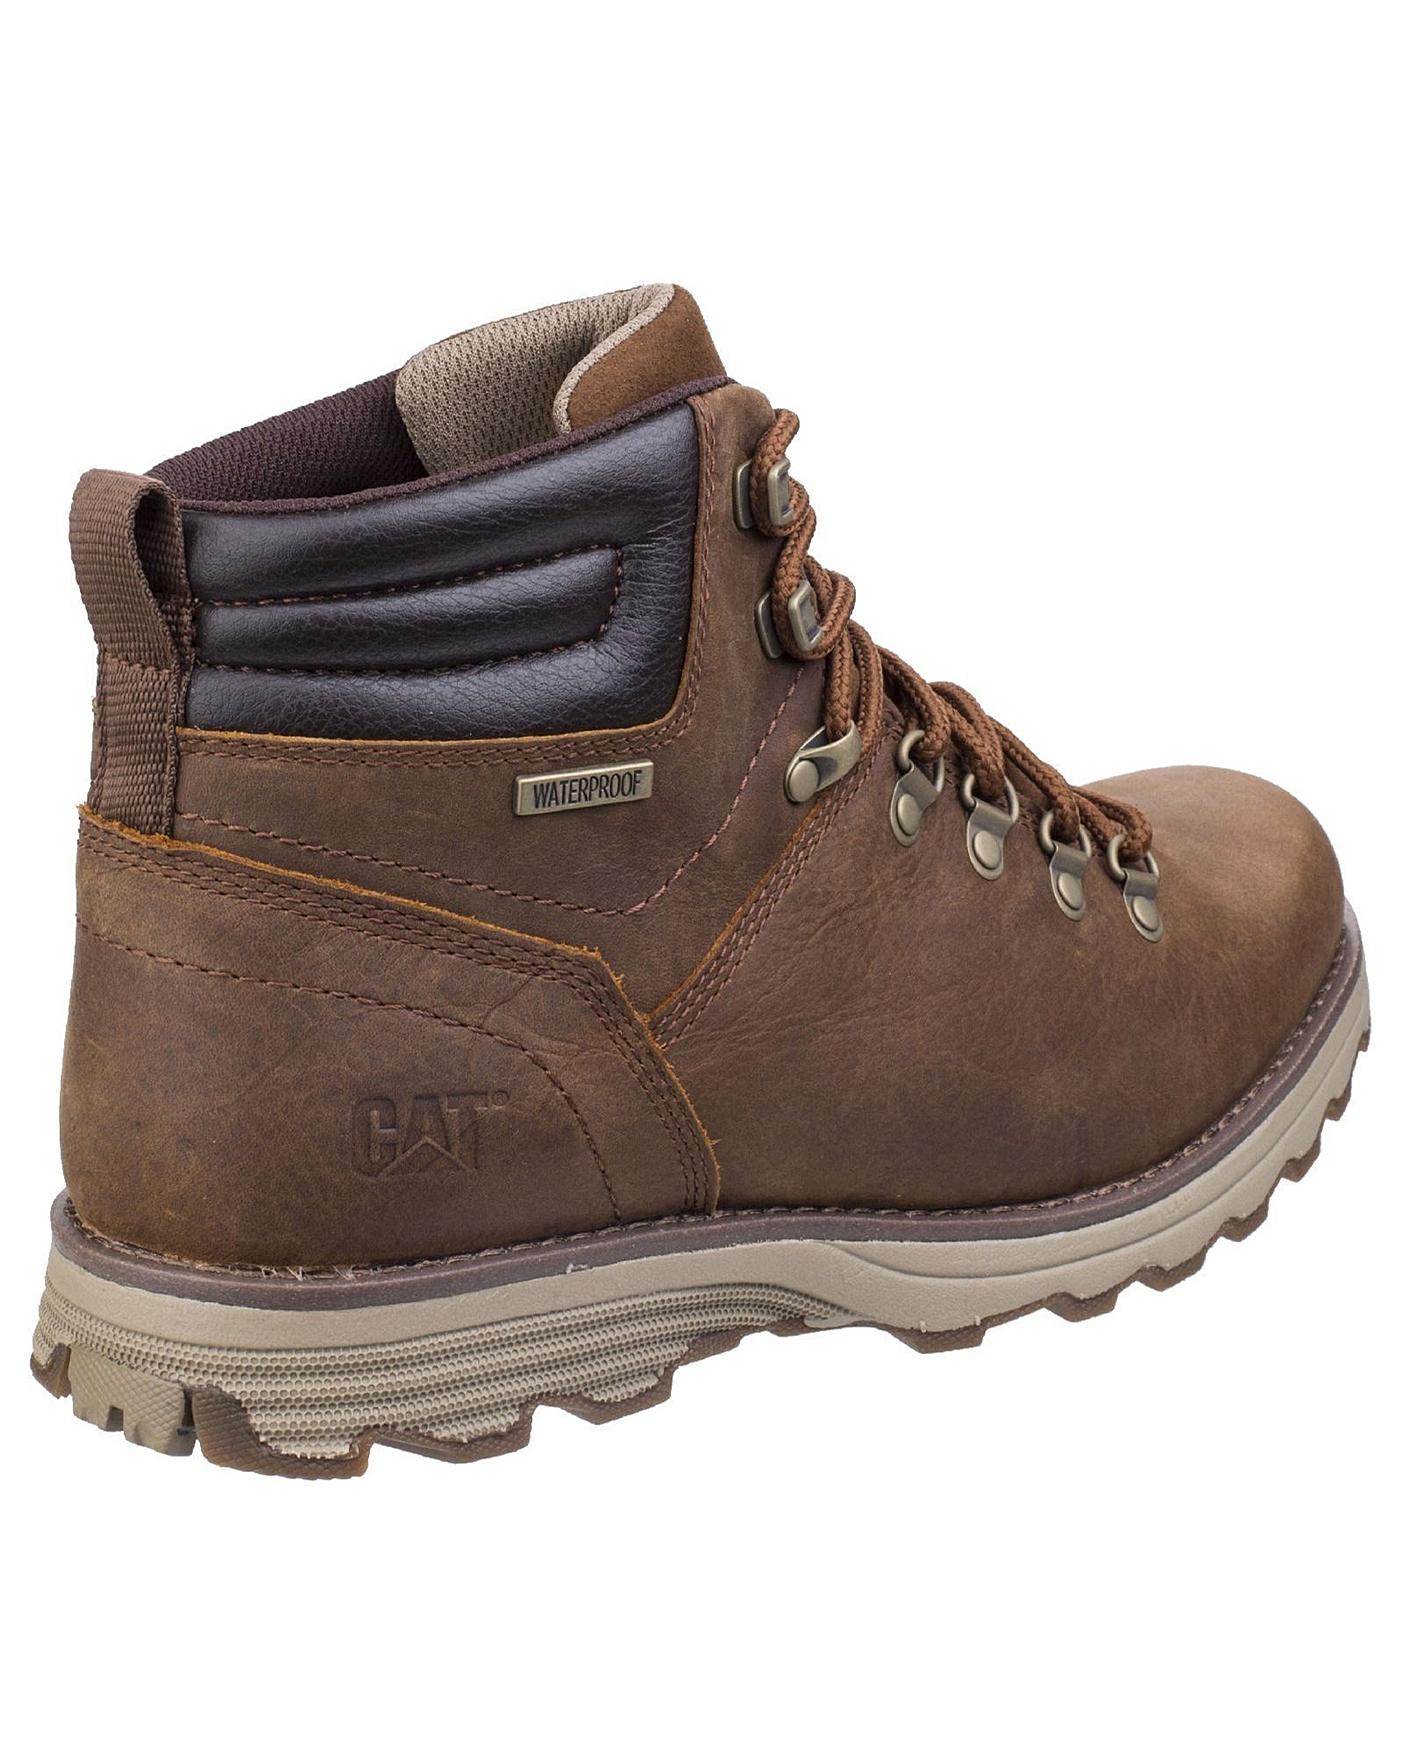 CAT Footwear Sire WP Mens Lace up Boot | J D Williams